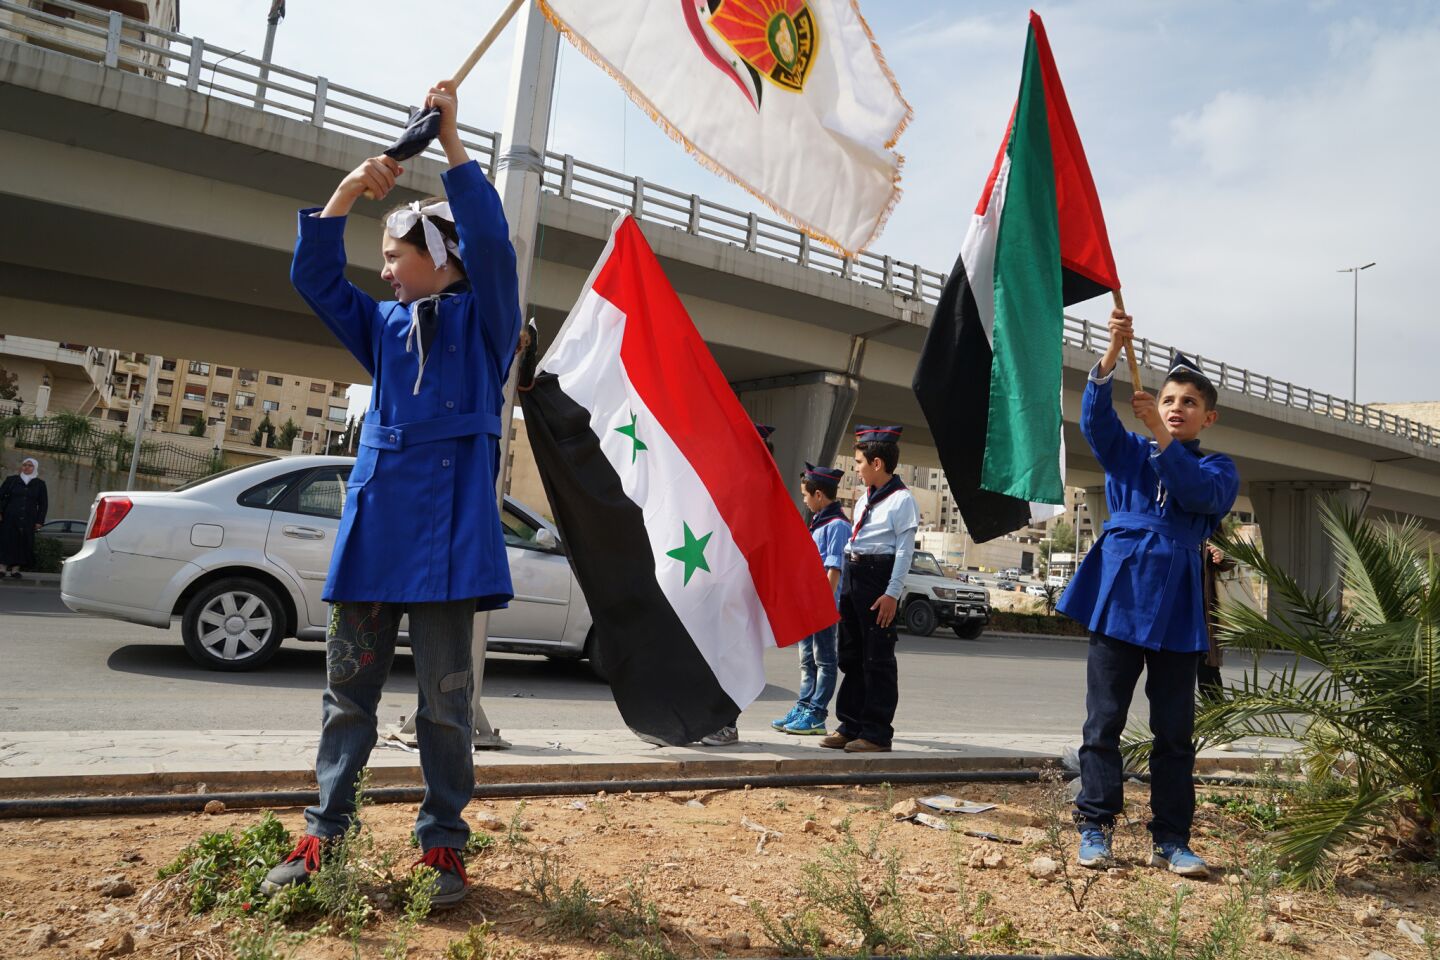 Elementary school children in a ruling party youth group wave Syrian flags along a street.